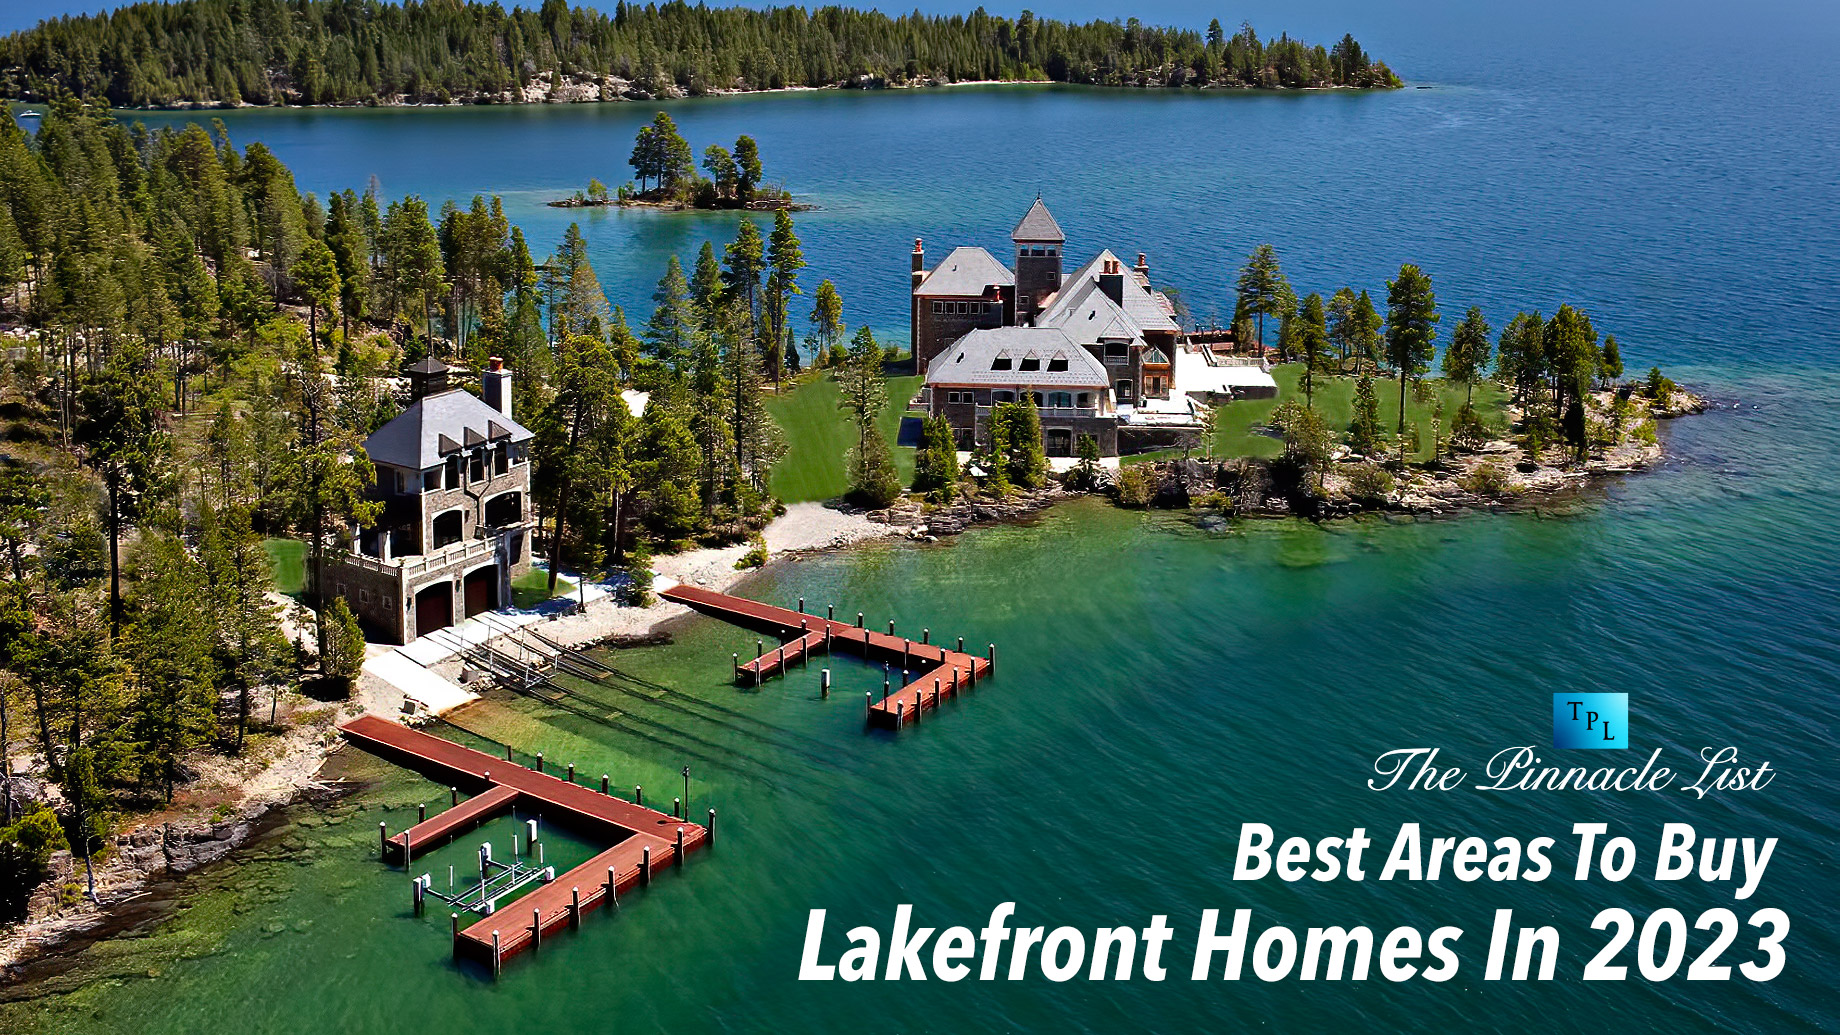 Best Areas To Buy Lakefront Homes In 2023